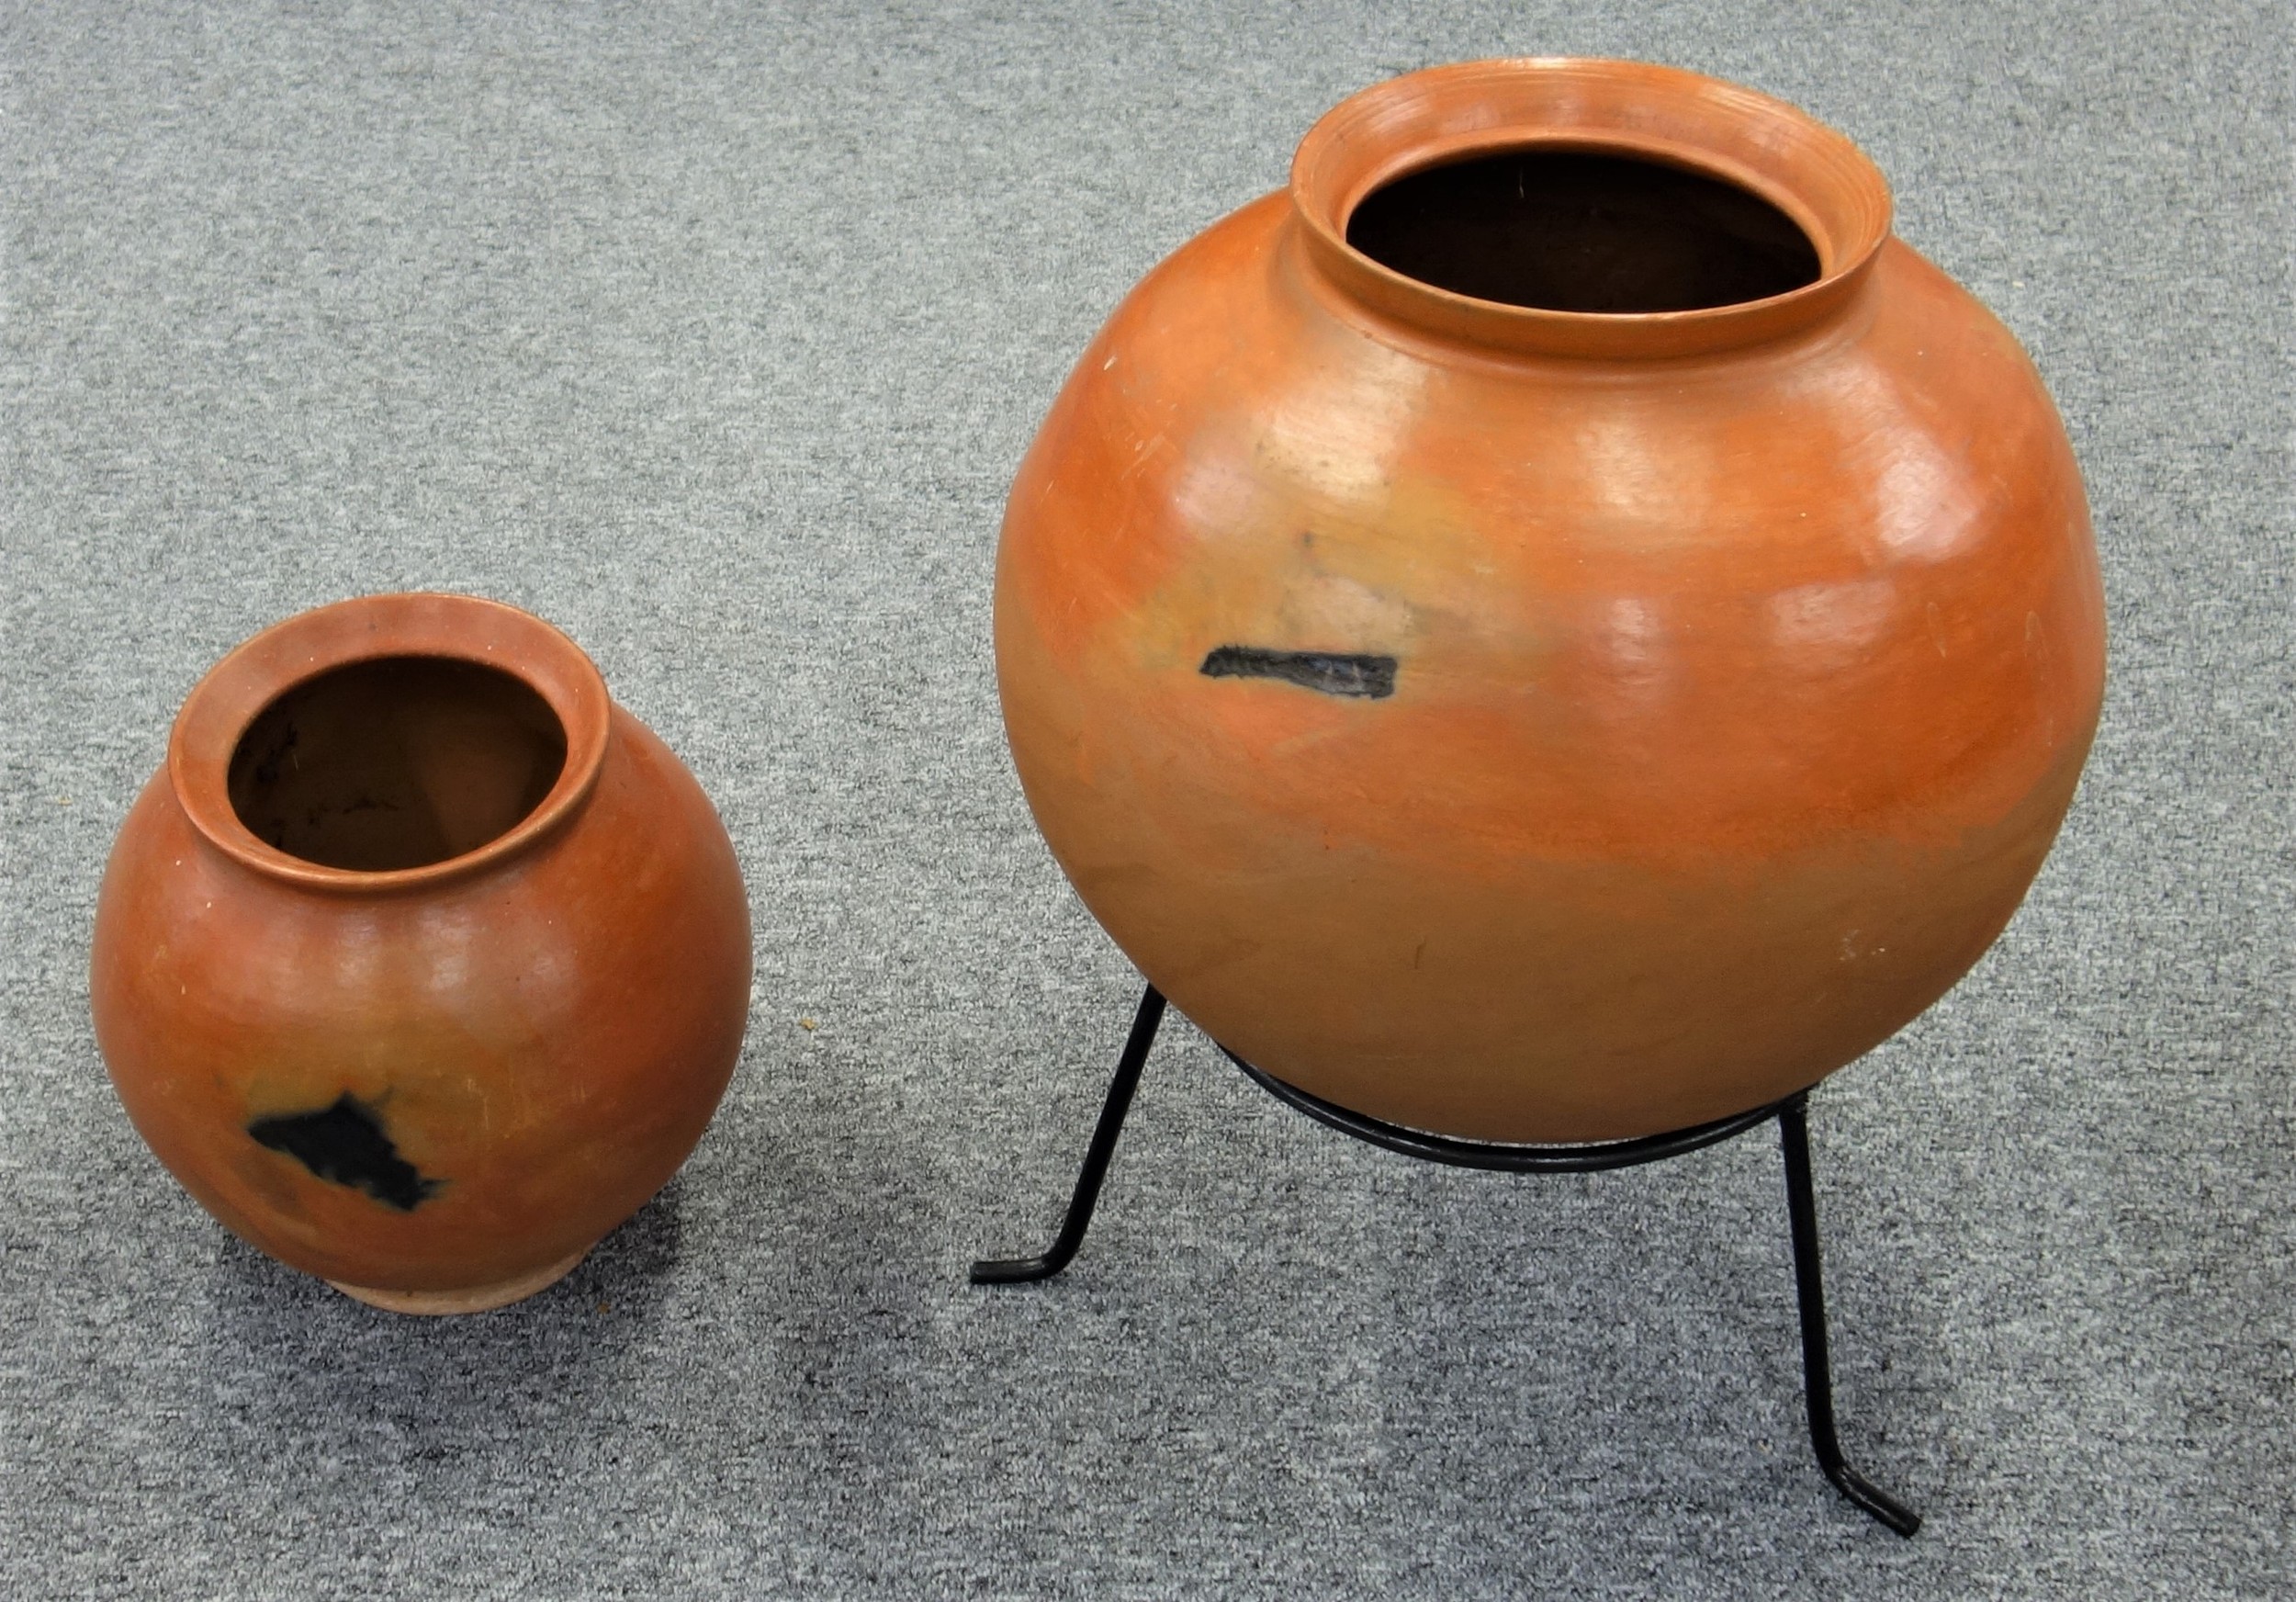 African sphericle terracotta pot with a flared rim, Dia. 47 cm on metal stand and a similar